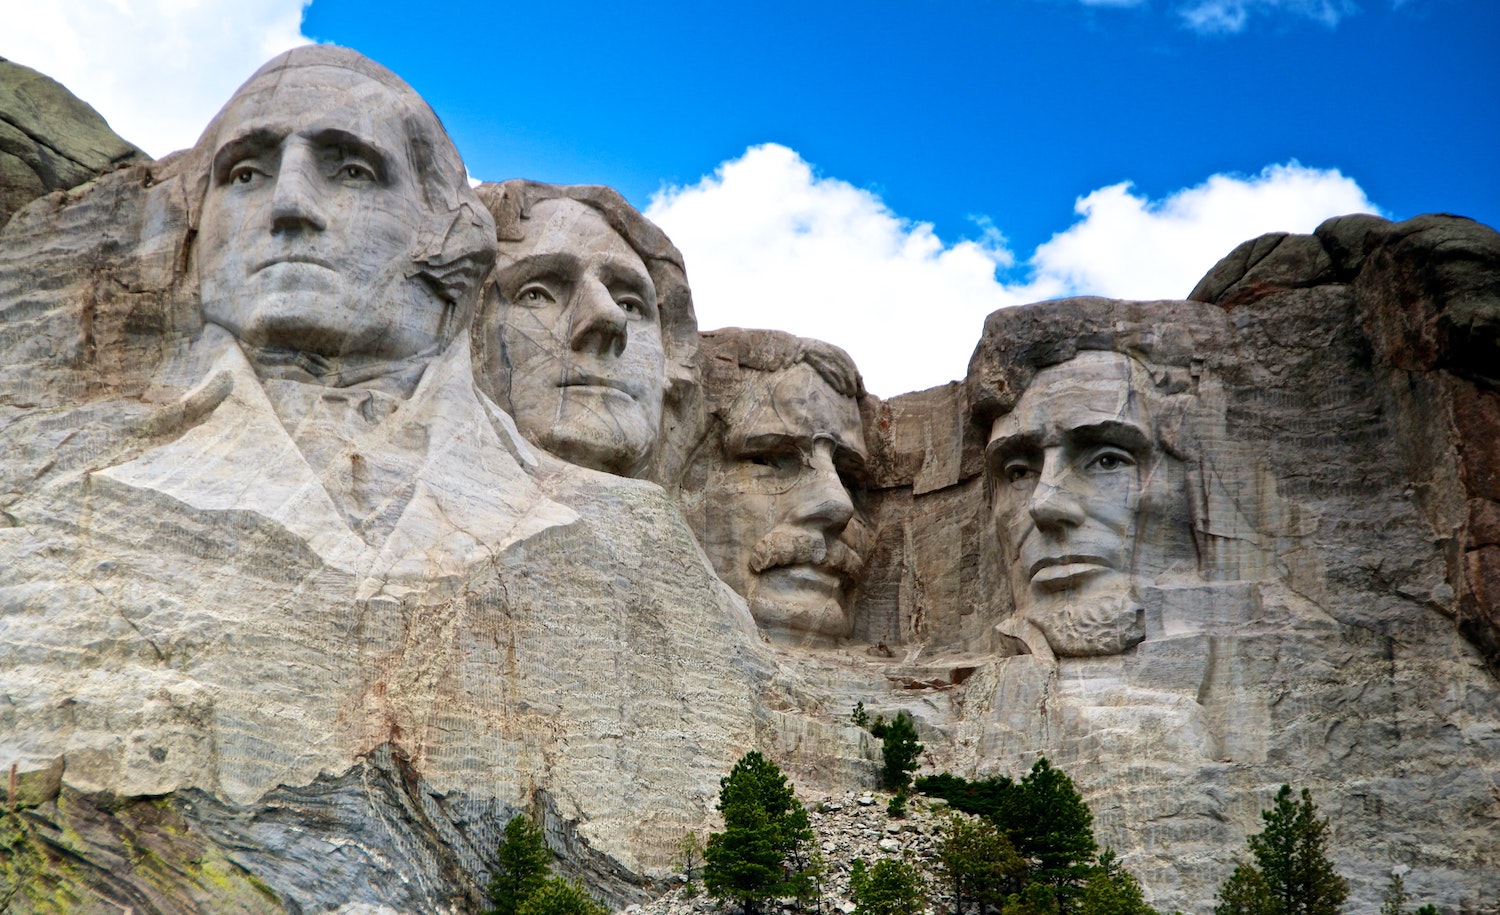 Mt. Rushmore represents United States presidents who were introverts